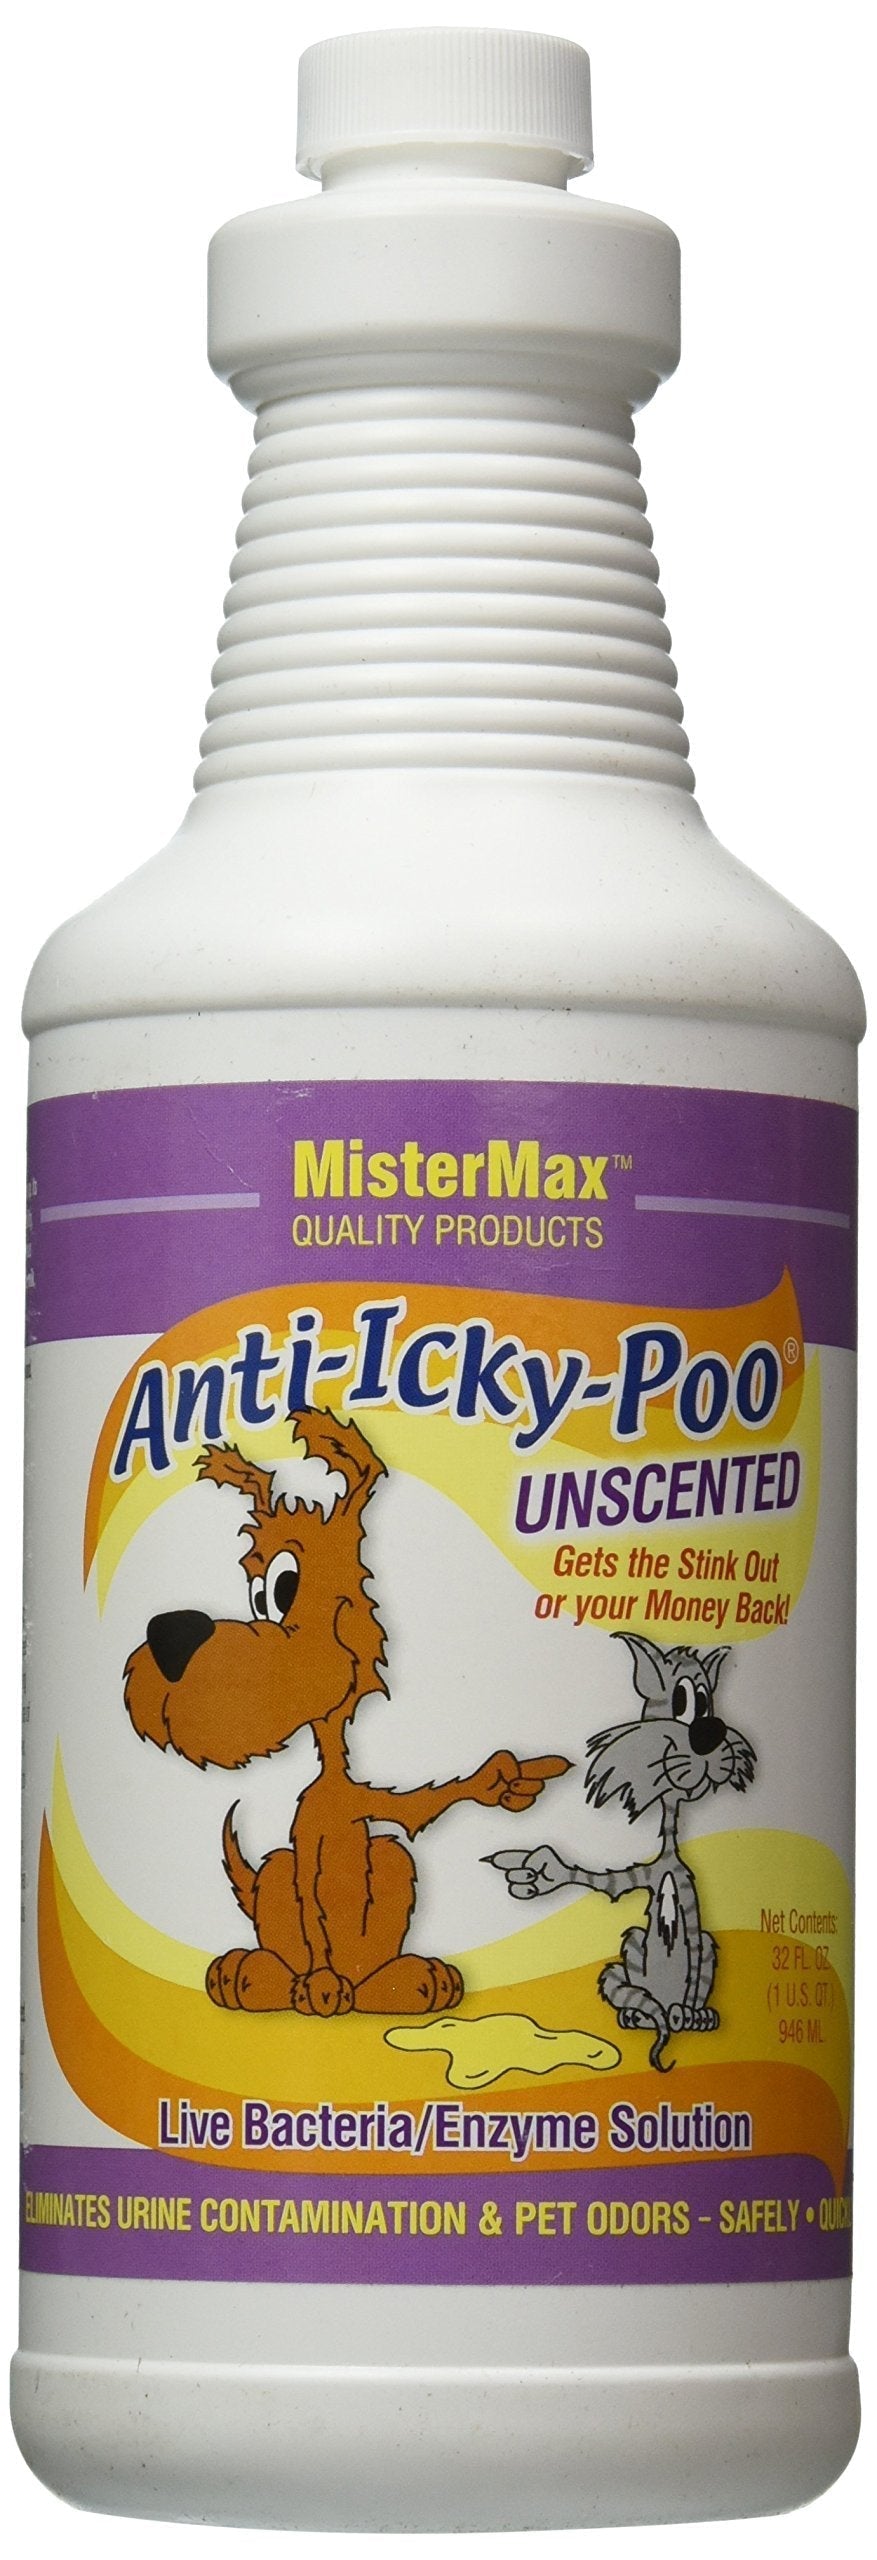 [Australia] - Mister Max Unscented Anti Icky Poo Odor Remover, Quart Size 